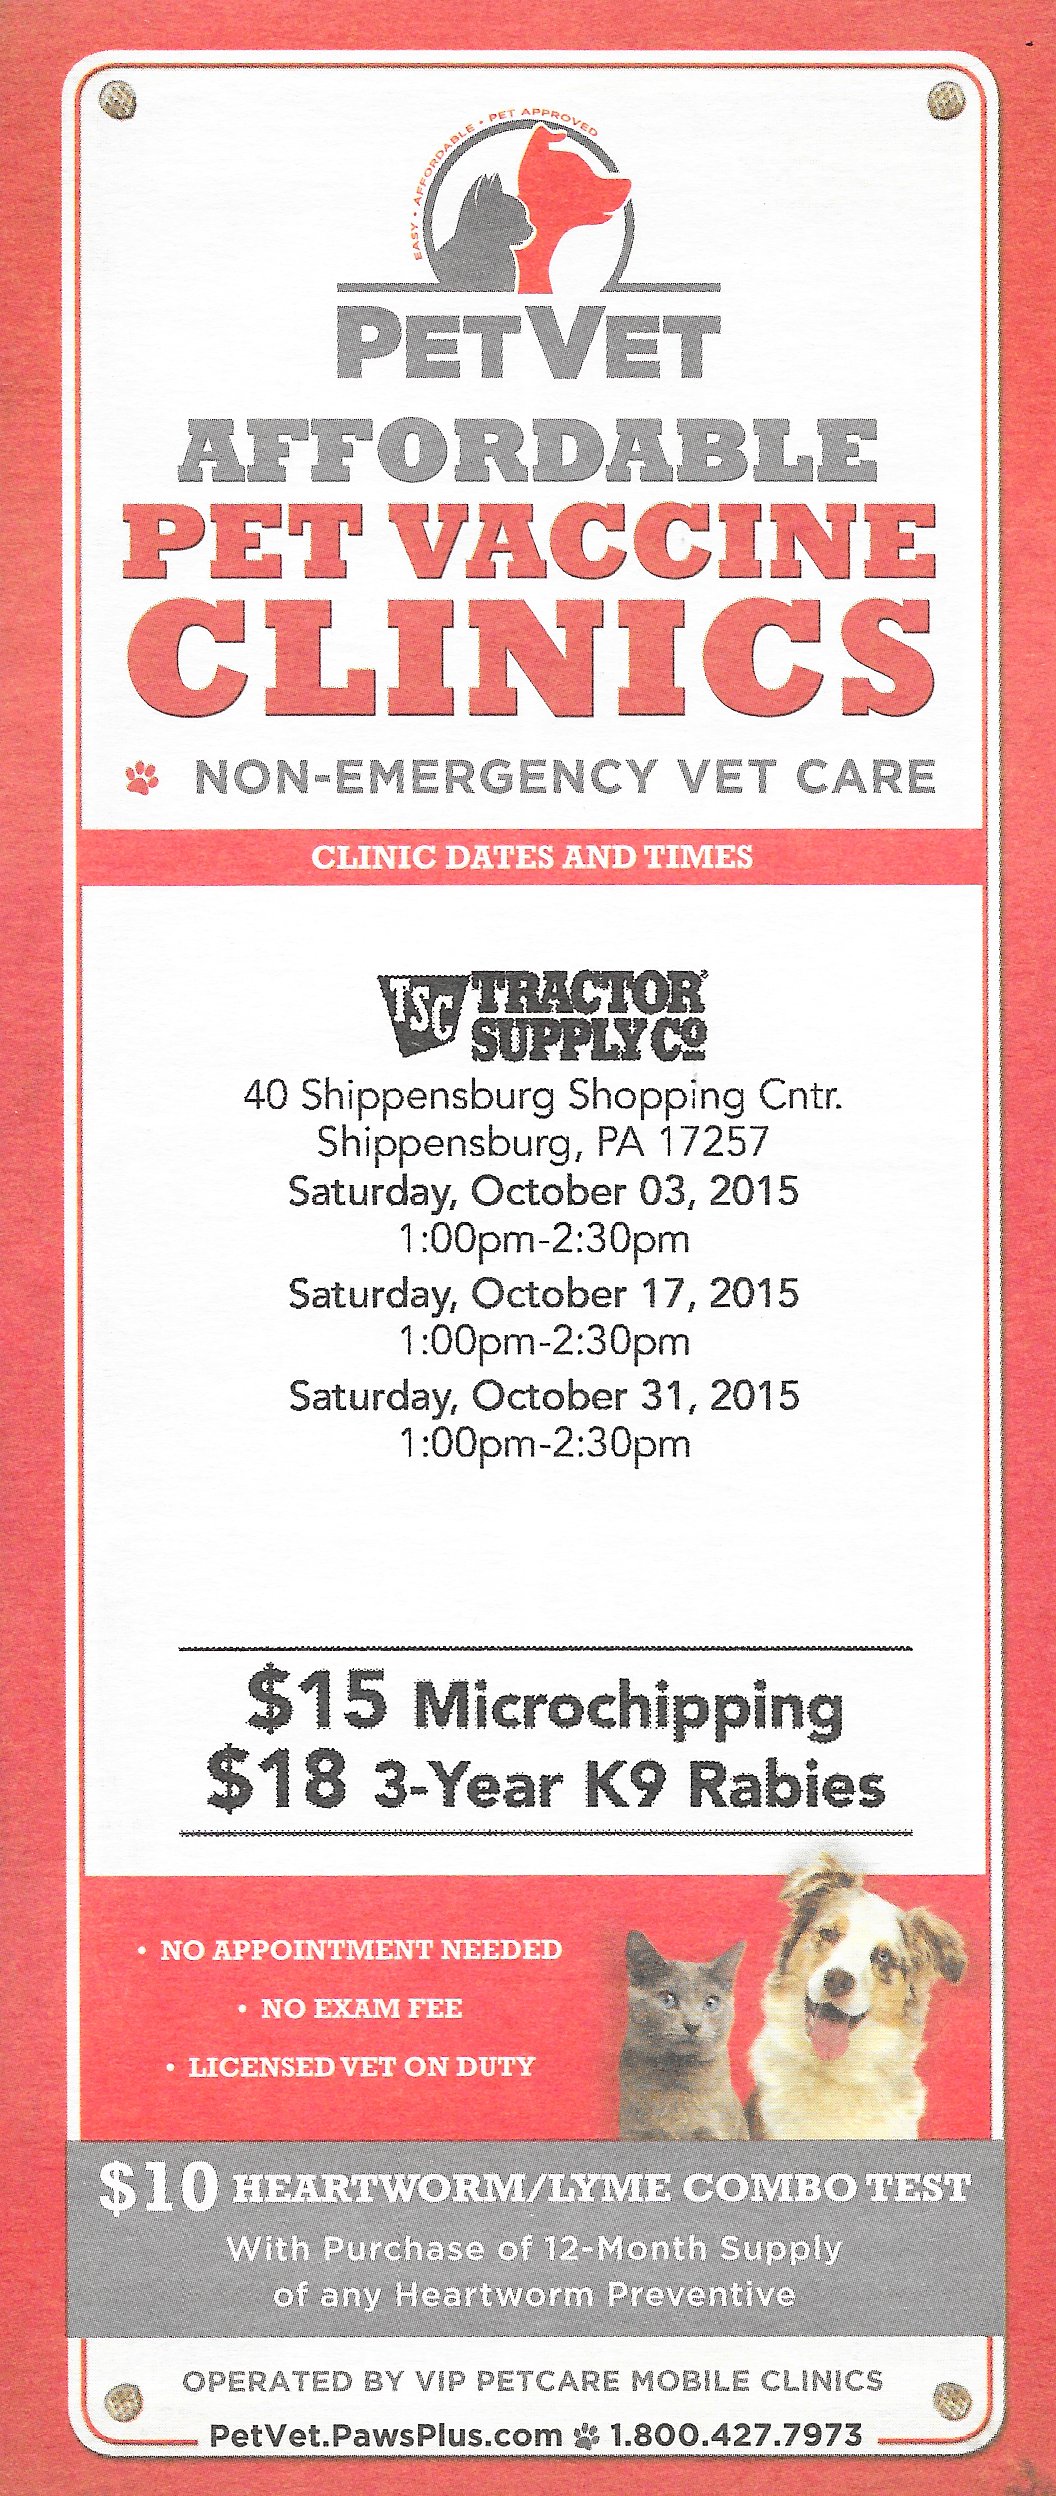 tractor-supply-october-2015-affordable-pet-vaccine-clinics-ship-saves